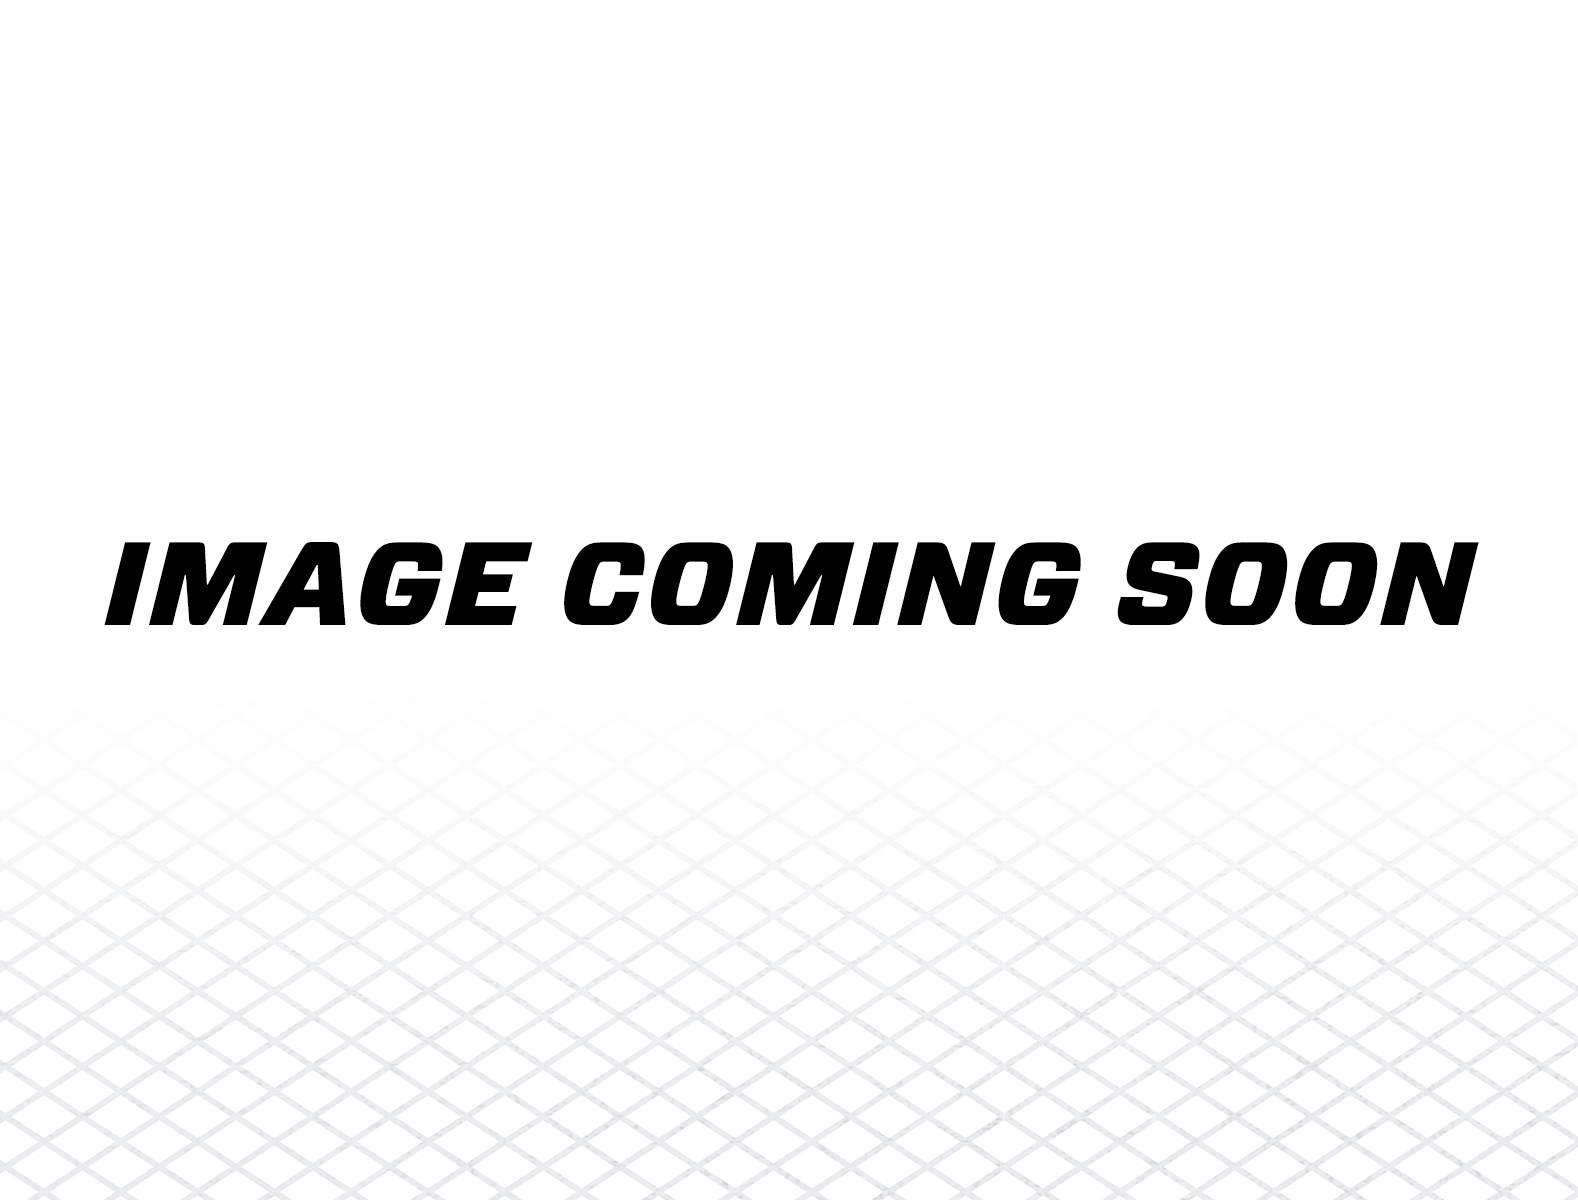 image coming soon graphic